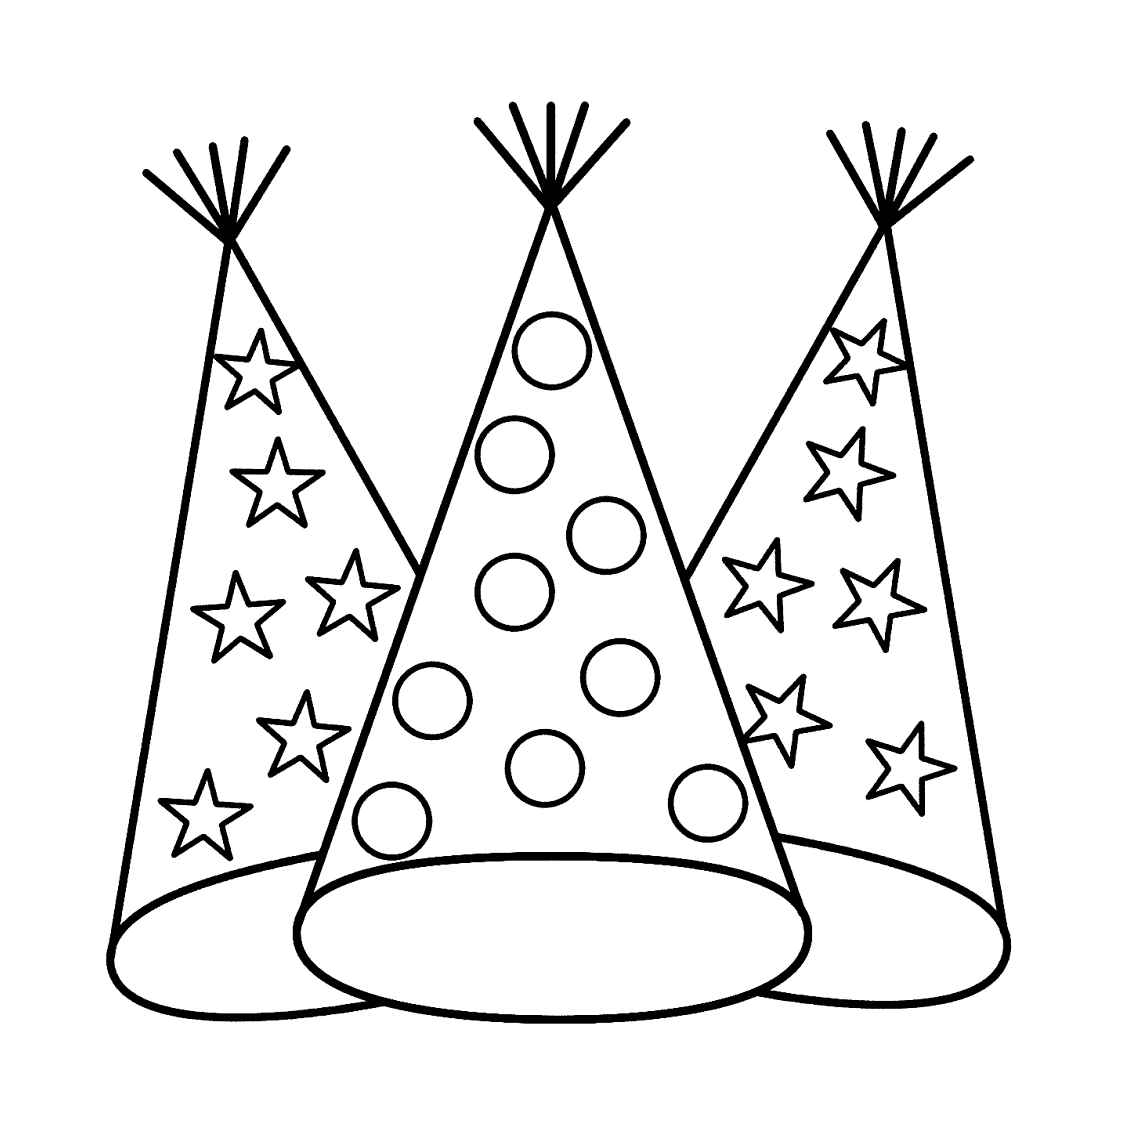 Birthday Party Hats Coloring Page – coloring.rocks!